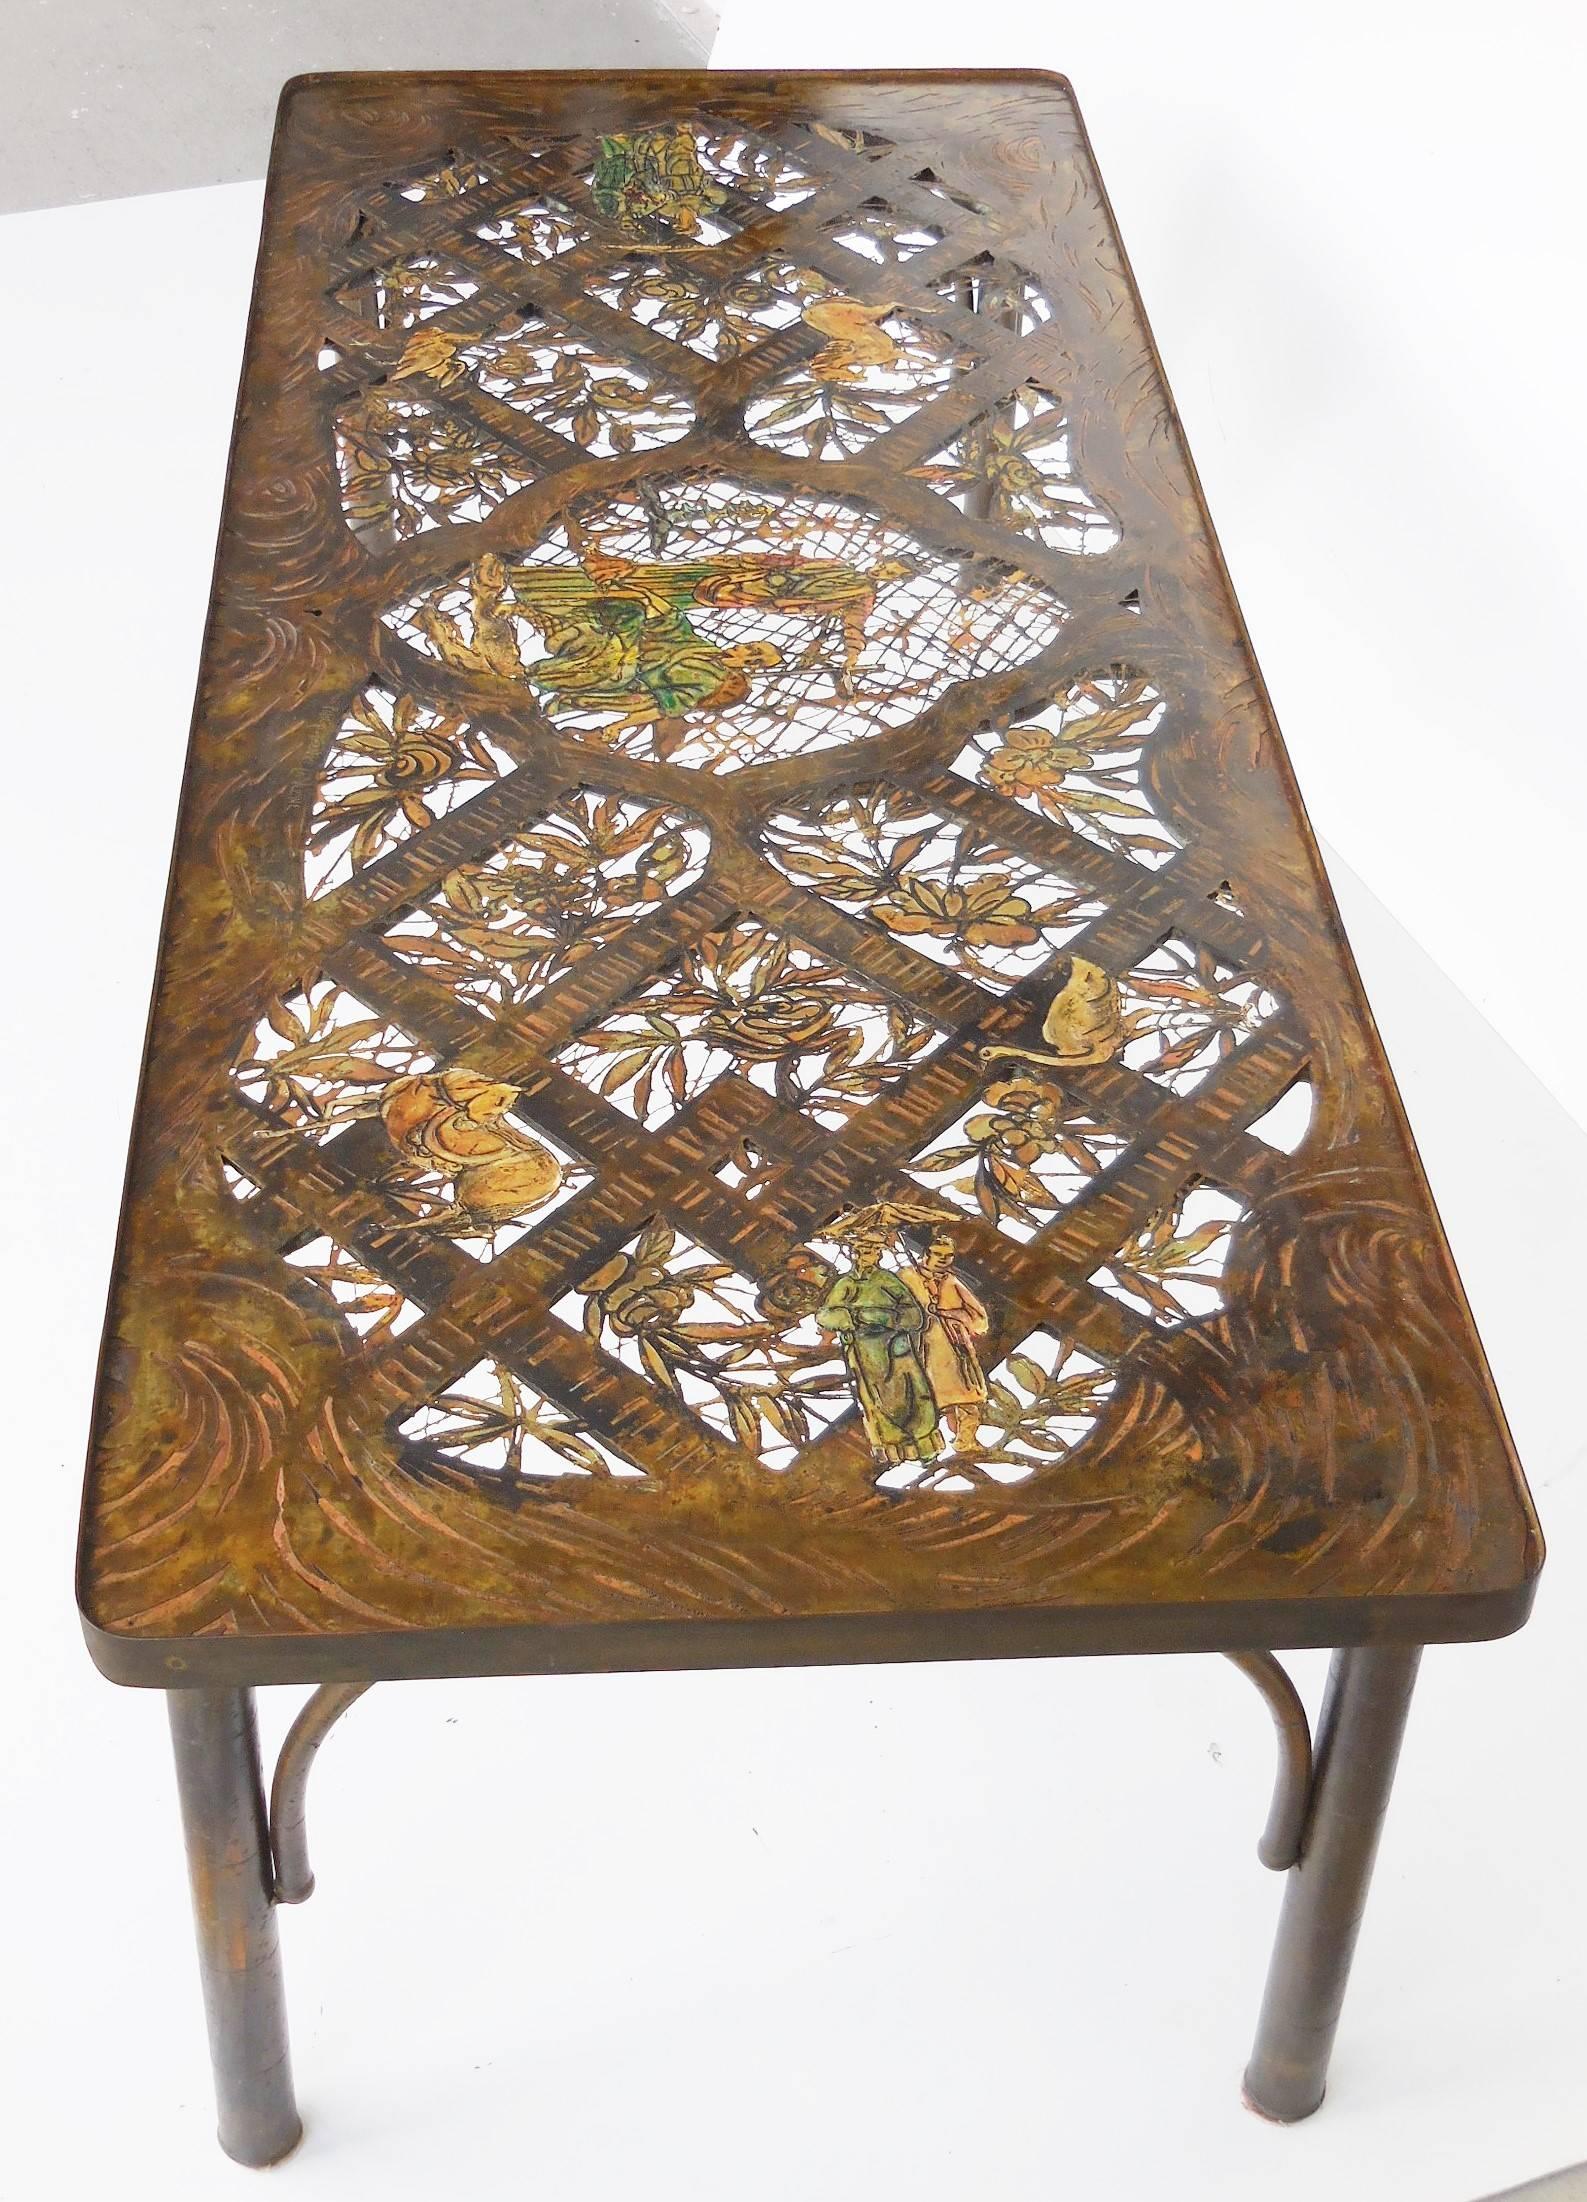 Exquisite and very unique coffee table by Philip and Kelvin LaVerne. The top has an intricate scene with cut-out and very fine detail. The condition is spectacular as the table retains the original glass top that has preserved the patinas and enamel